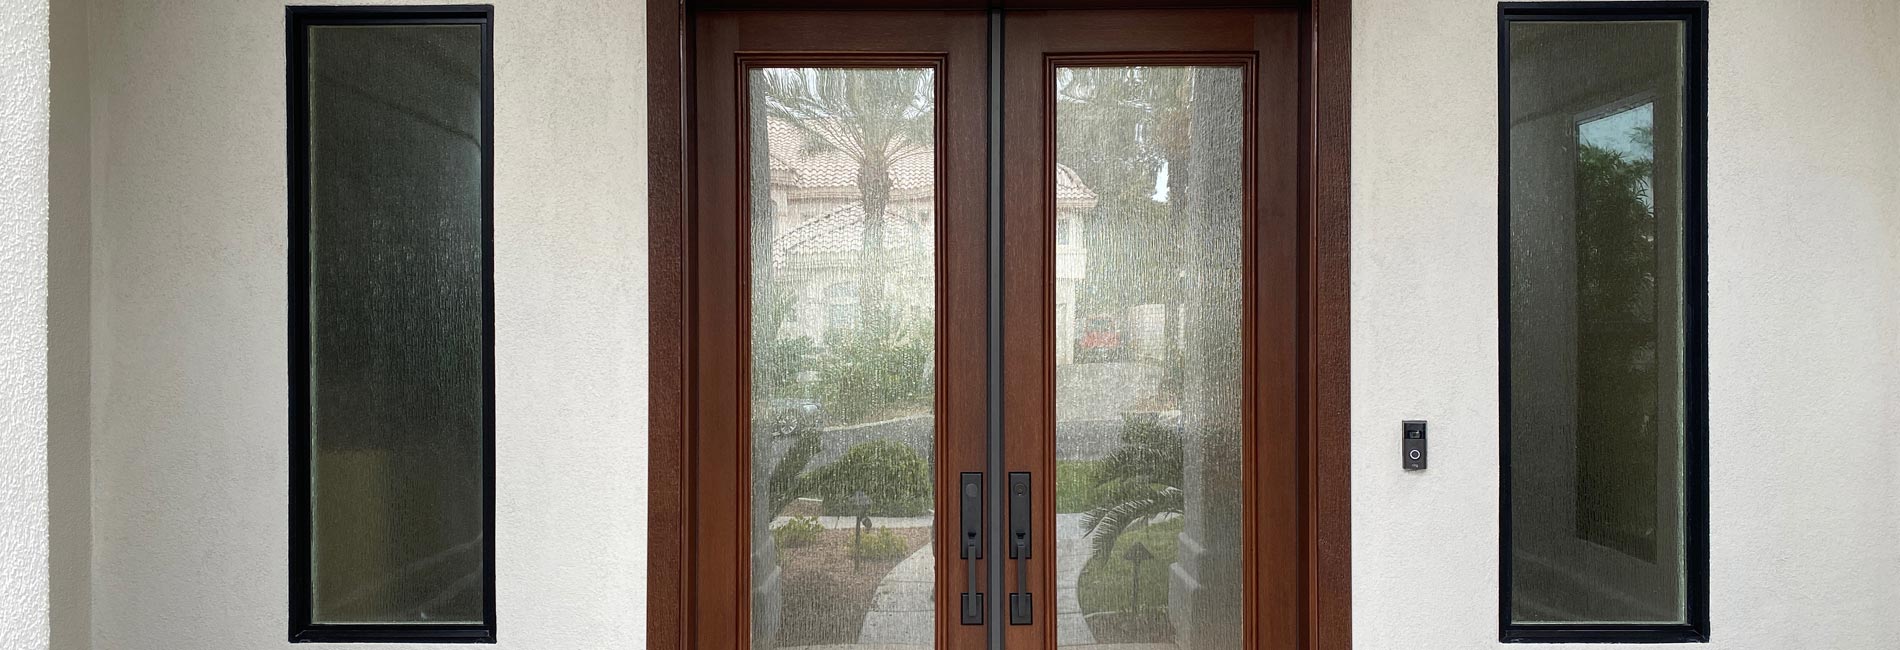 Beautiful wooden double french doors with panel windows on both sides in home entrance remodel